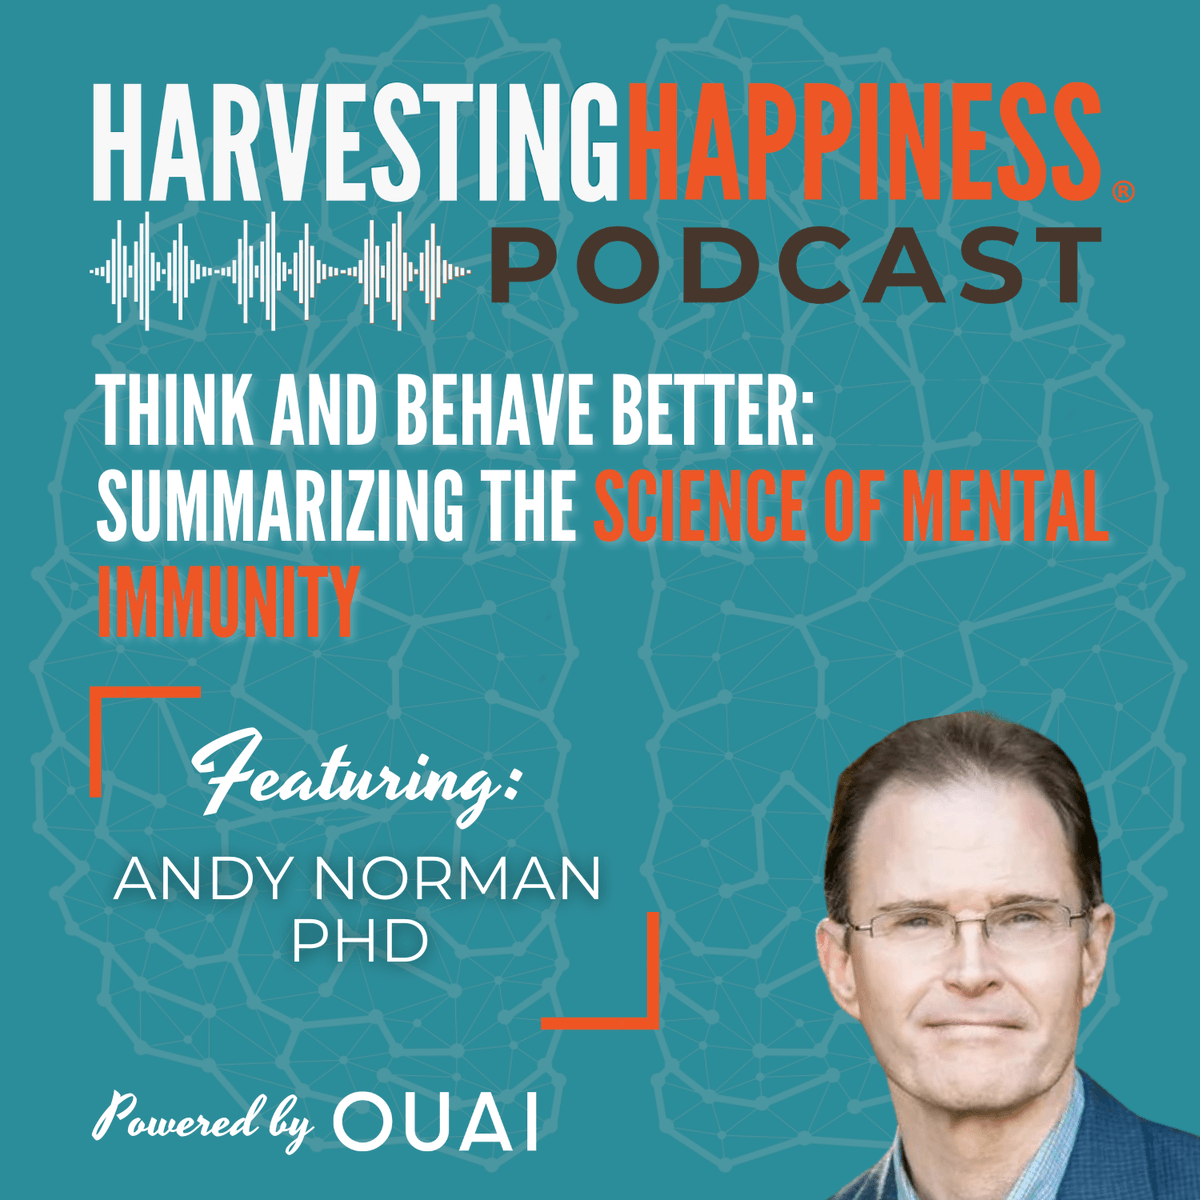 Calling all CRITICAL THINKERS!!! 🧠 📻 A new episode of Harvesting Happiness is LIVE. In this episode, we summarize the science of mental immunity with @DrAndyNo. Discover how to protect yourself from media manipulation + get ready for a new BONUS SESSION from More Mental…